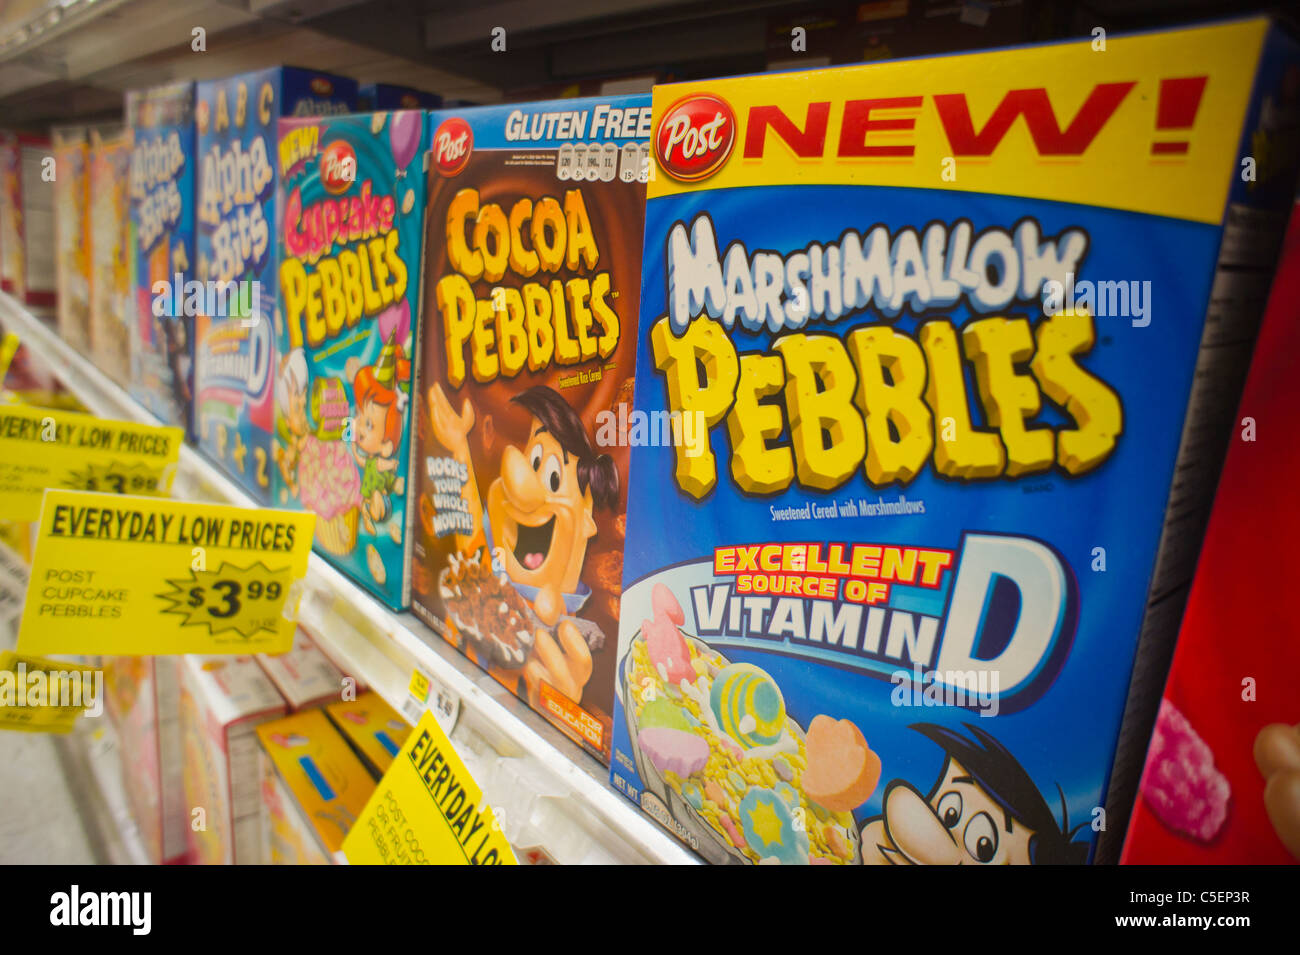 Boxes of Post breakfast cereal featuring cartoon characters on supermarket shelves in New York Stock Photo